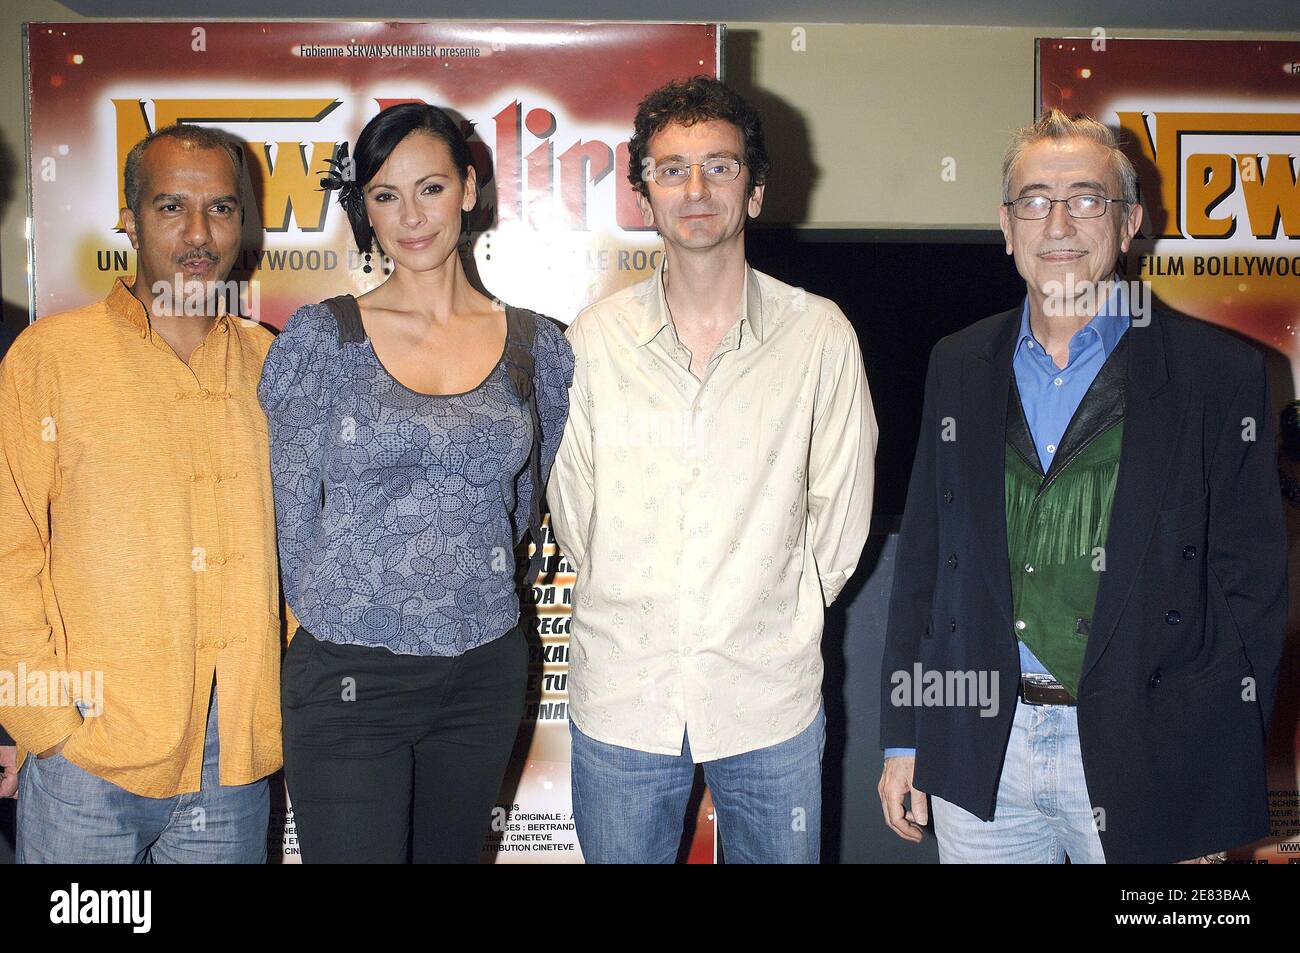 Actors Pascal Legitimus, Mathilda May, Luis Rego and director Eric Le Roch (c) attend the premiere of 'New Delire,' held at UGC Les Halles theater in Paris, France on June 28, 2007. Photo by Giancarlo Gorassini/ABACAPRESS.COM Stock Photo